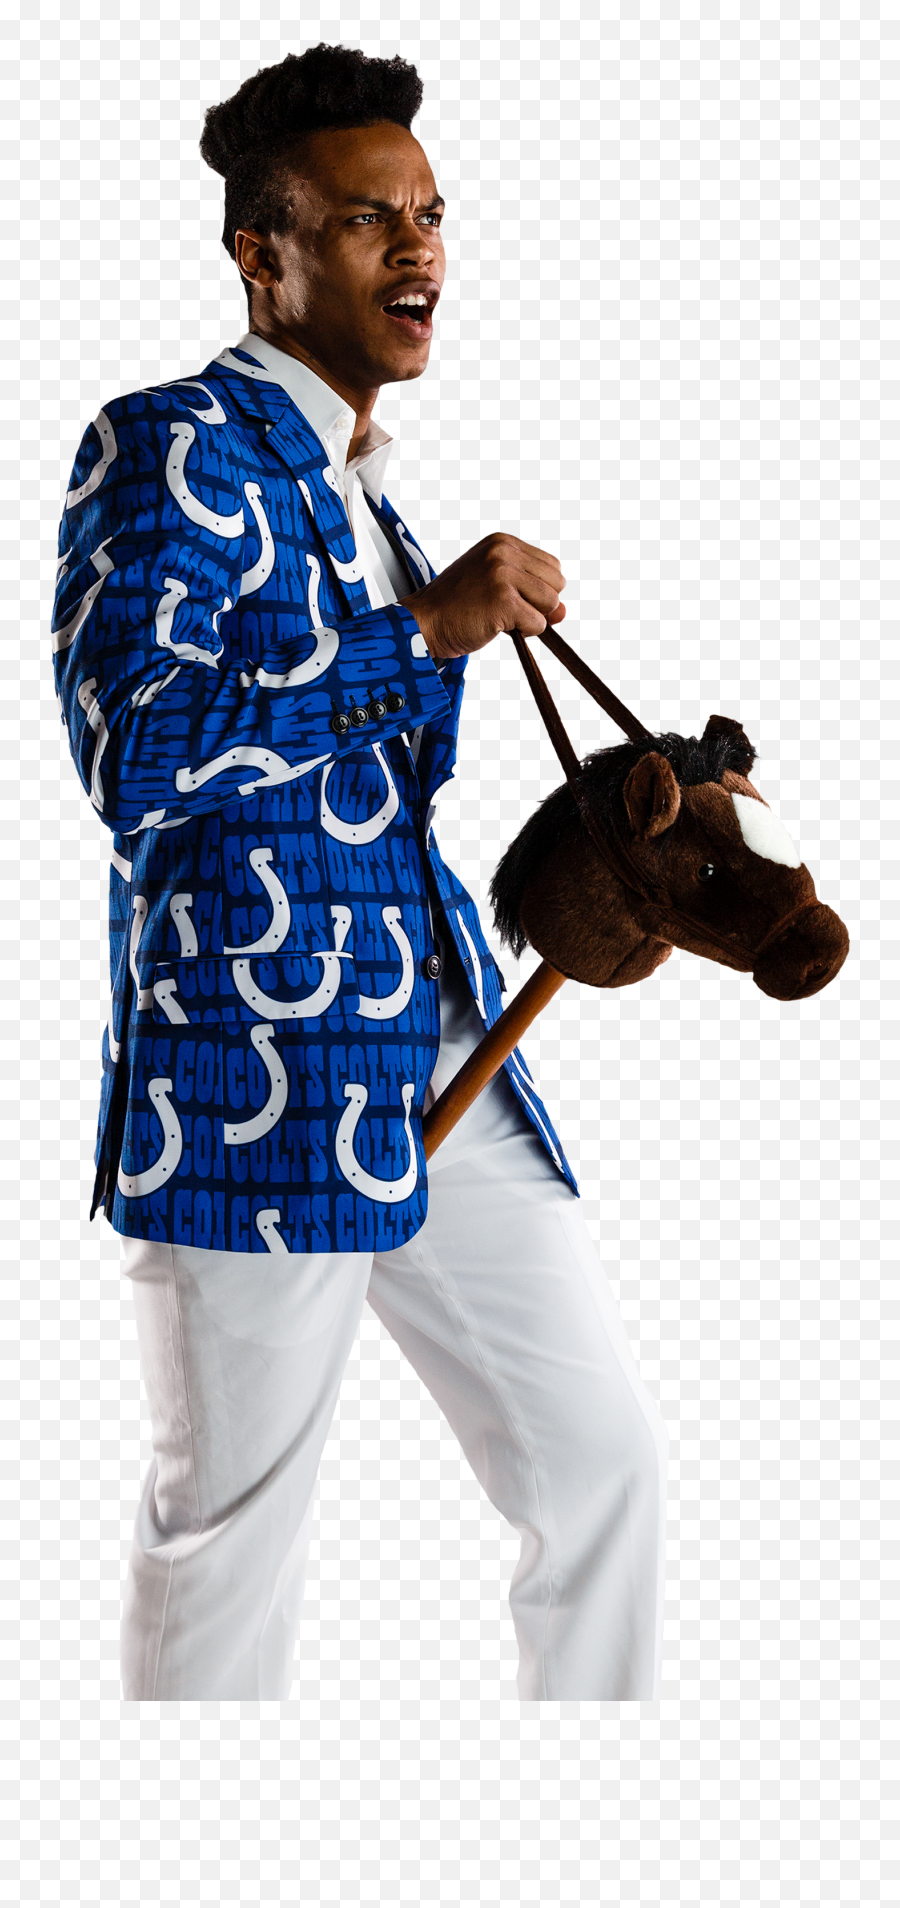 The Indianapolis Colts Nfl Gameday Blazer - Gentleman Png,Indianapolis Colts Logo Png